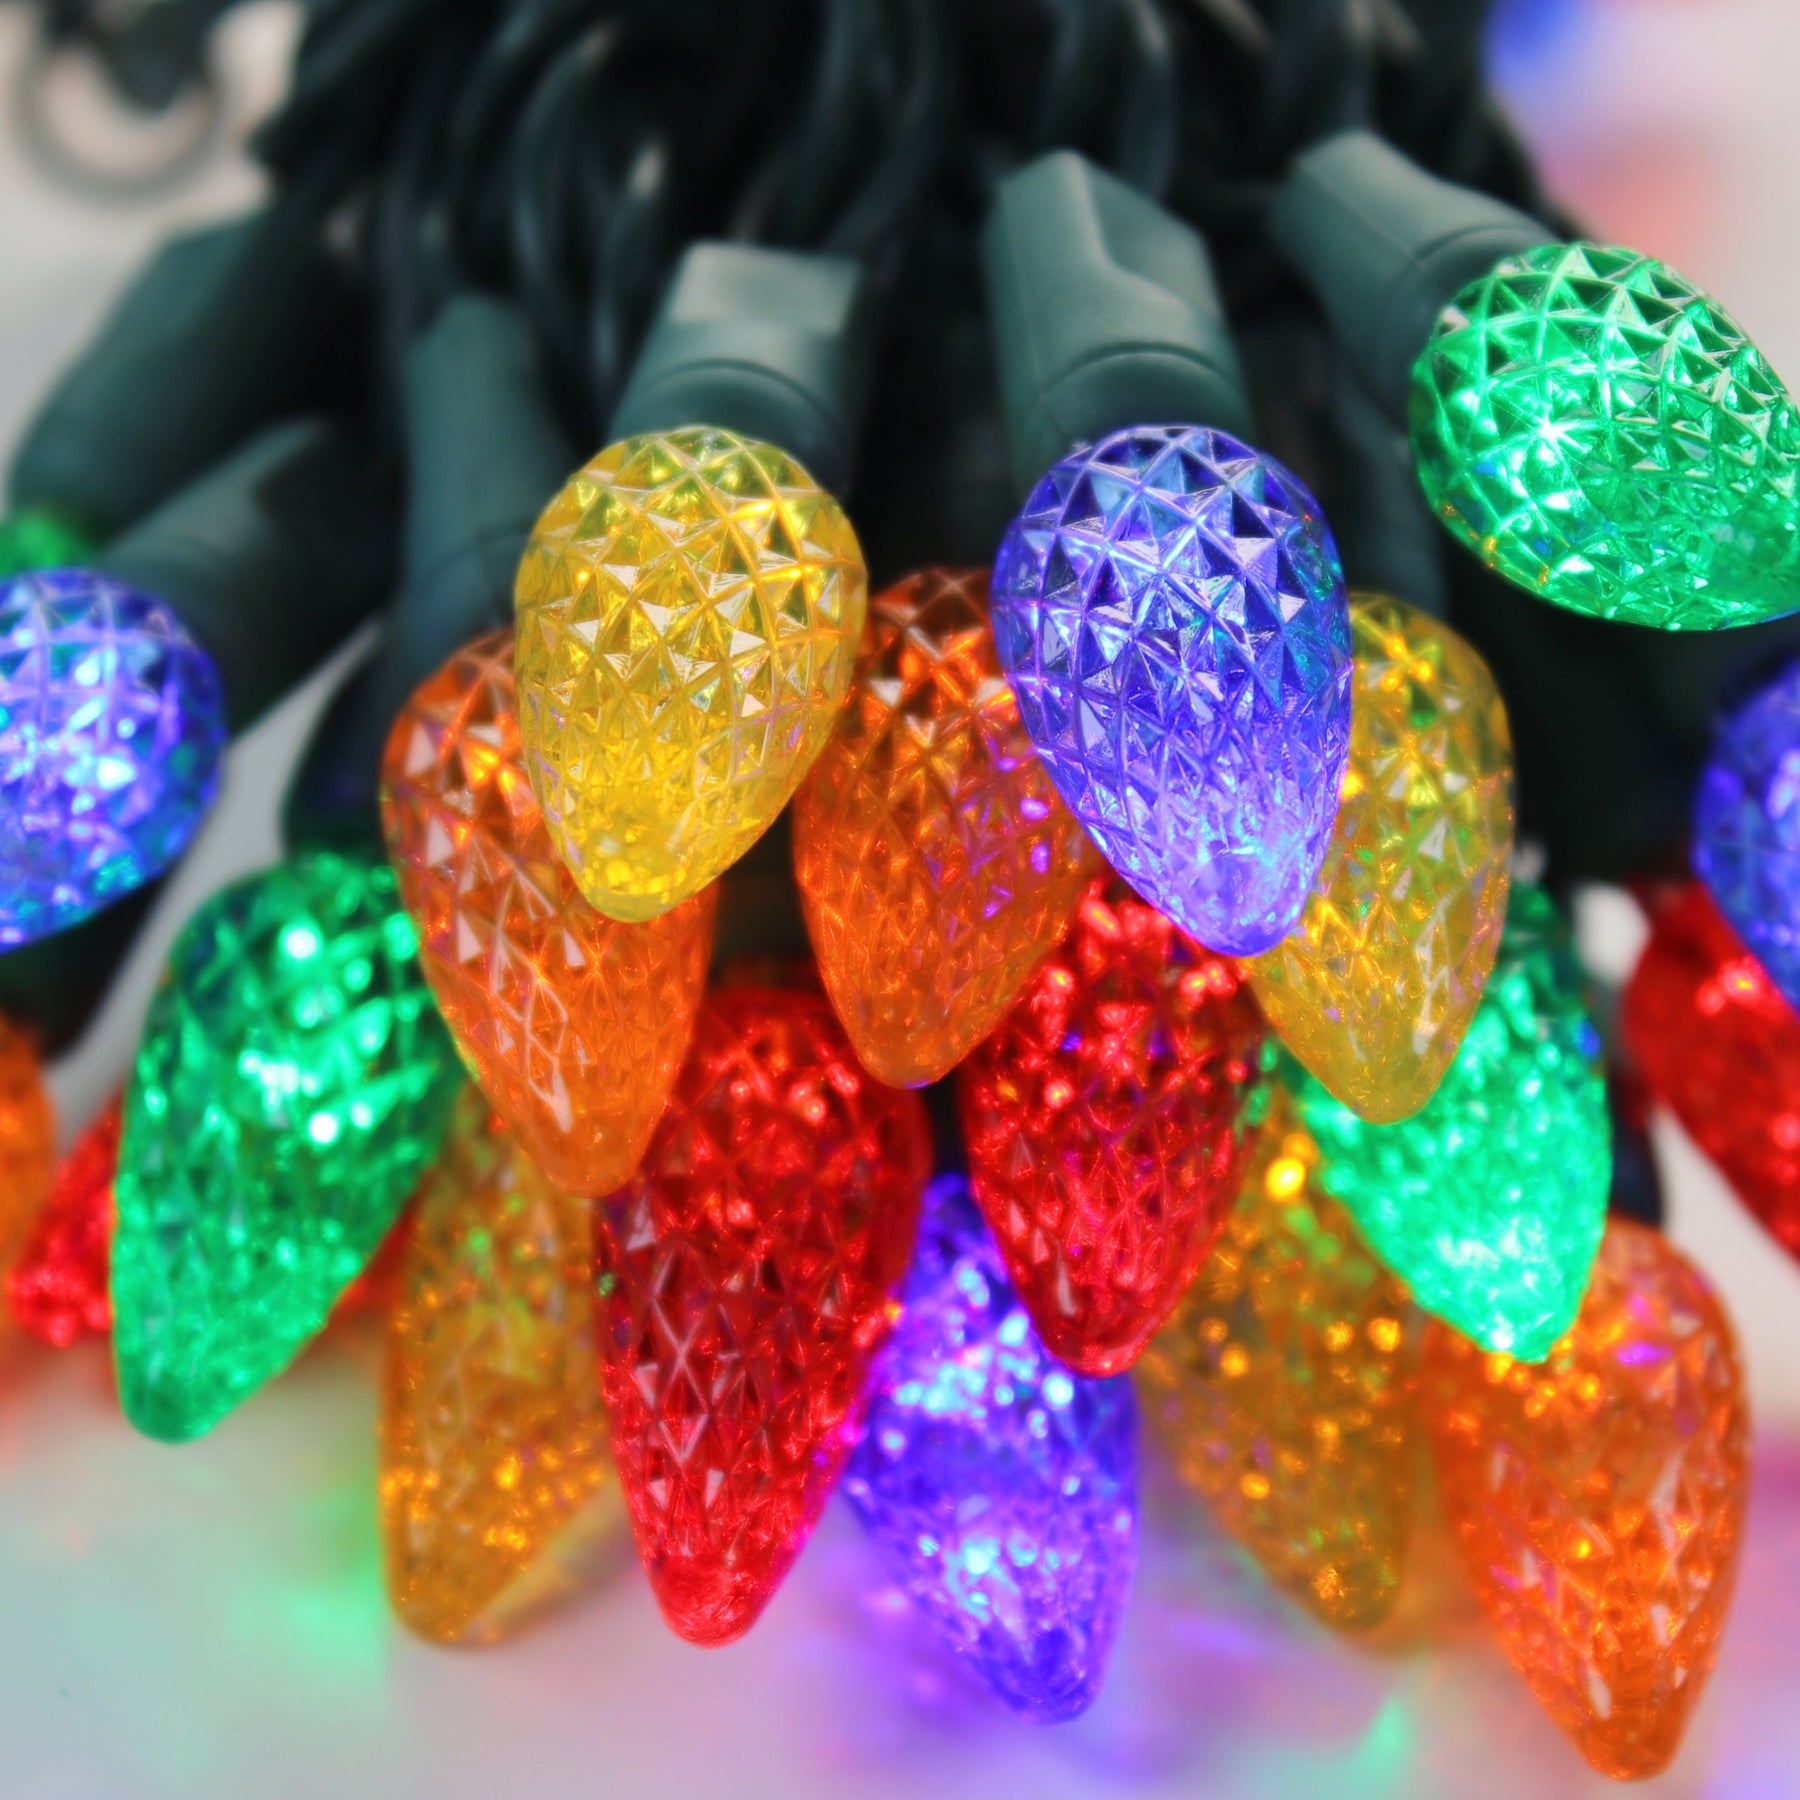 Remote Controlled 50 LED Multi-Color Fairy String Lights